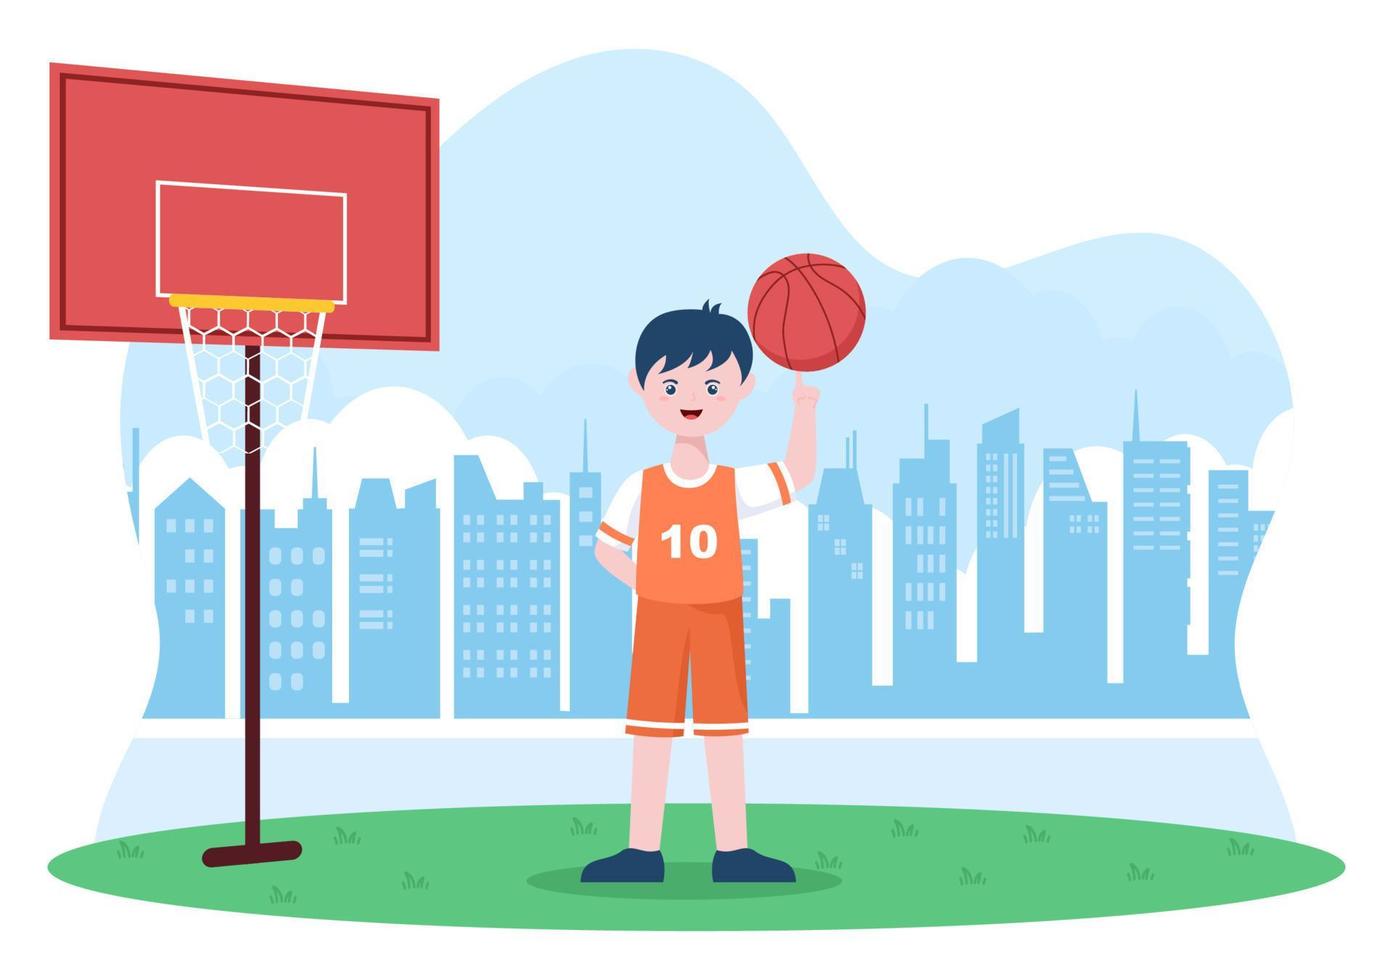 Happy Young Man Playing Basketball Flat Design Illustration Wearing Basket Uniform in Outdoor Court for Background, Poster or Banner vector